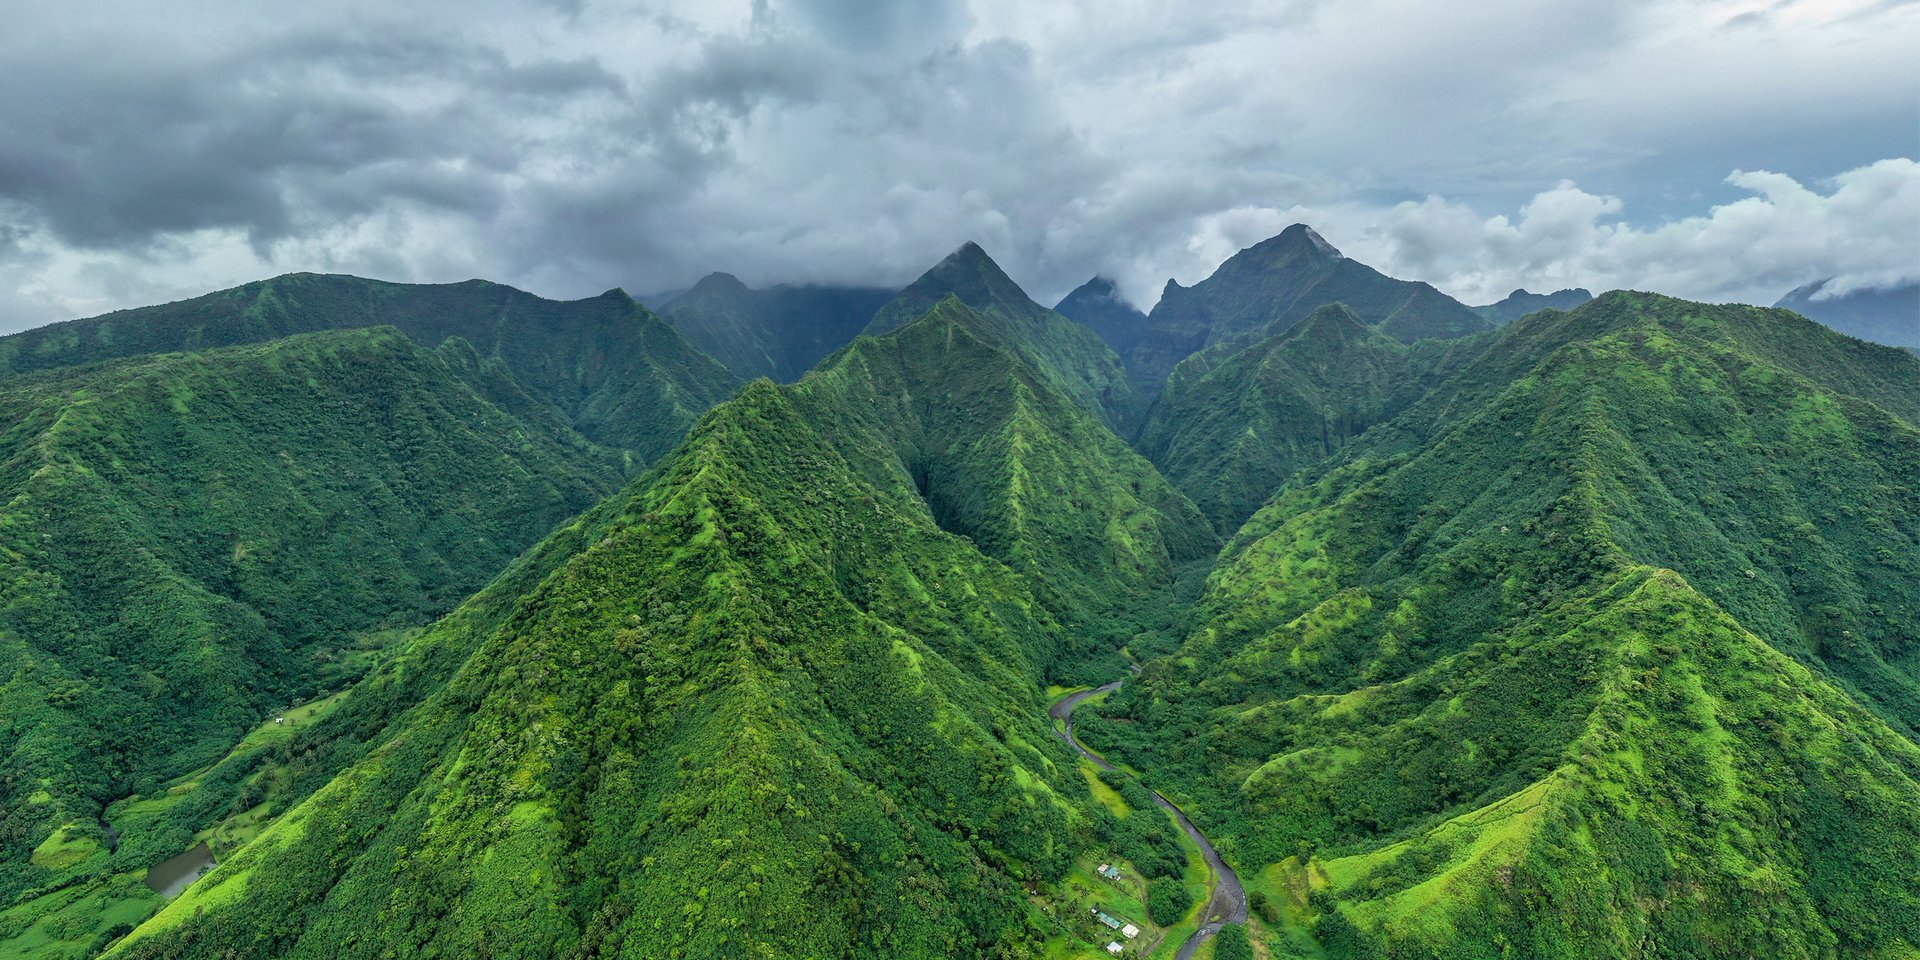 The mountains of Tahiti offer vistas like none other